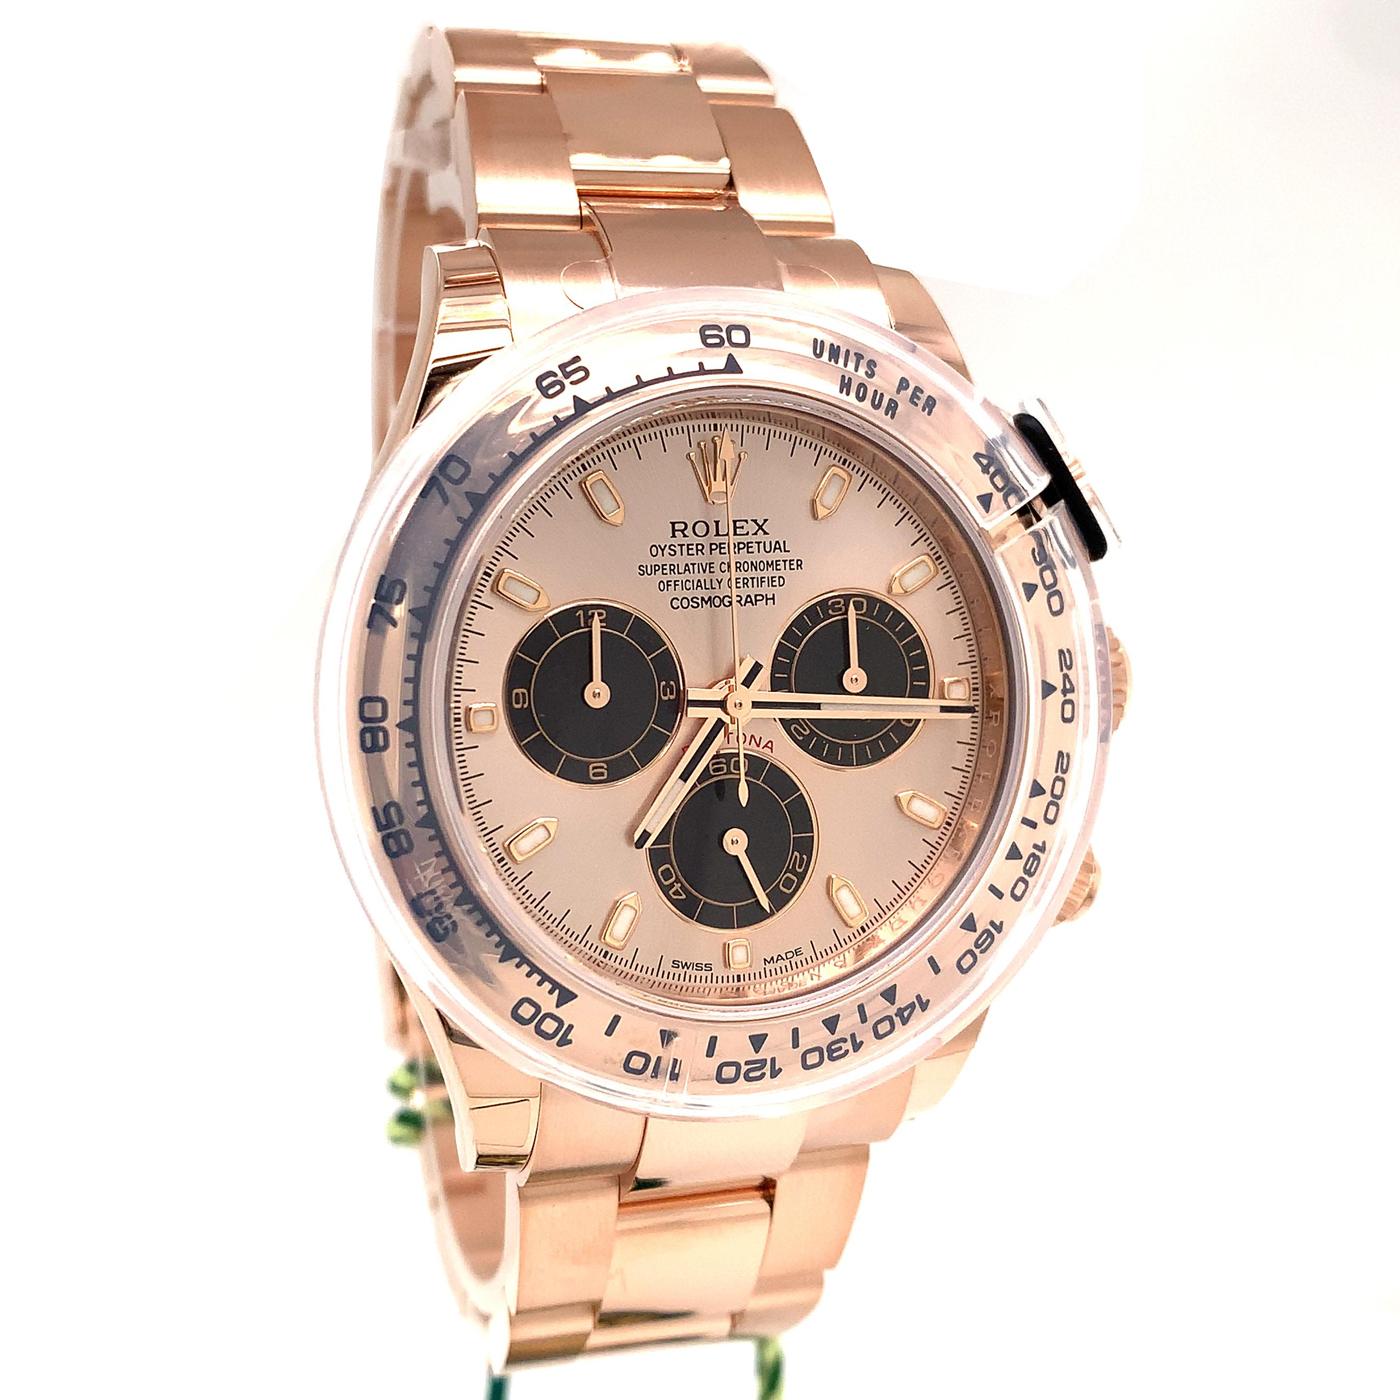 Daytona Rose Gold Pink Panda Dial Oyster Perpetual Cosmograph Mens Watch 116505 For Sale 3